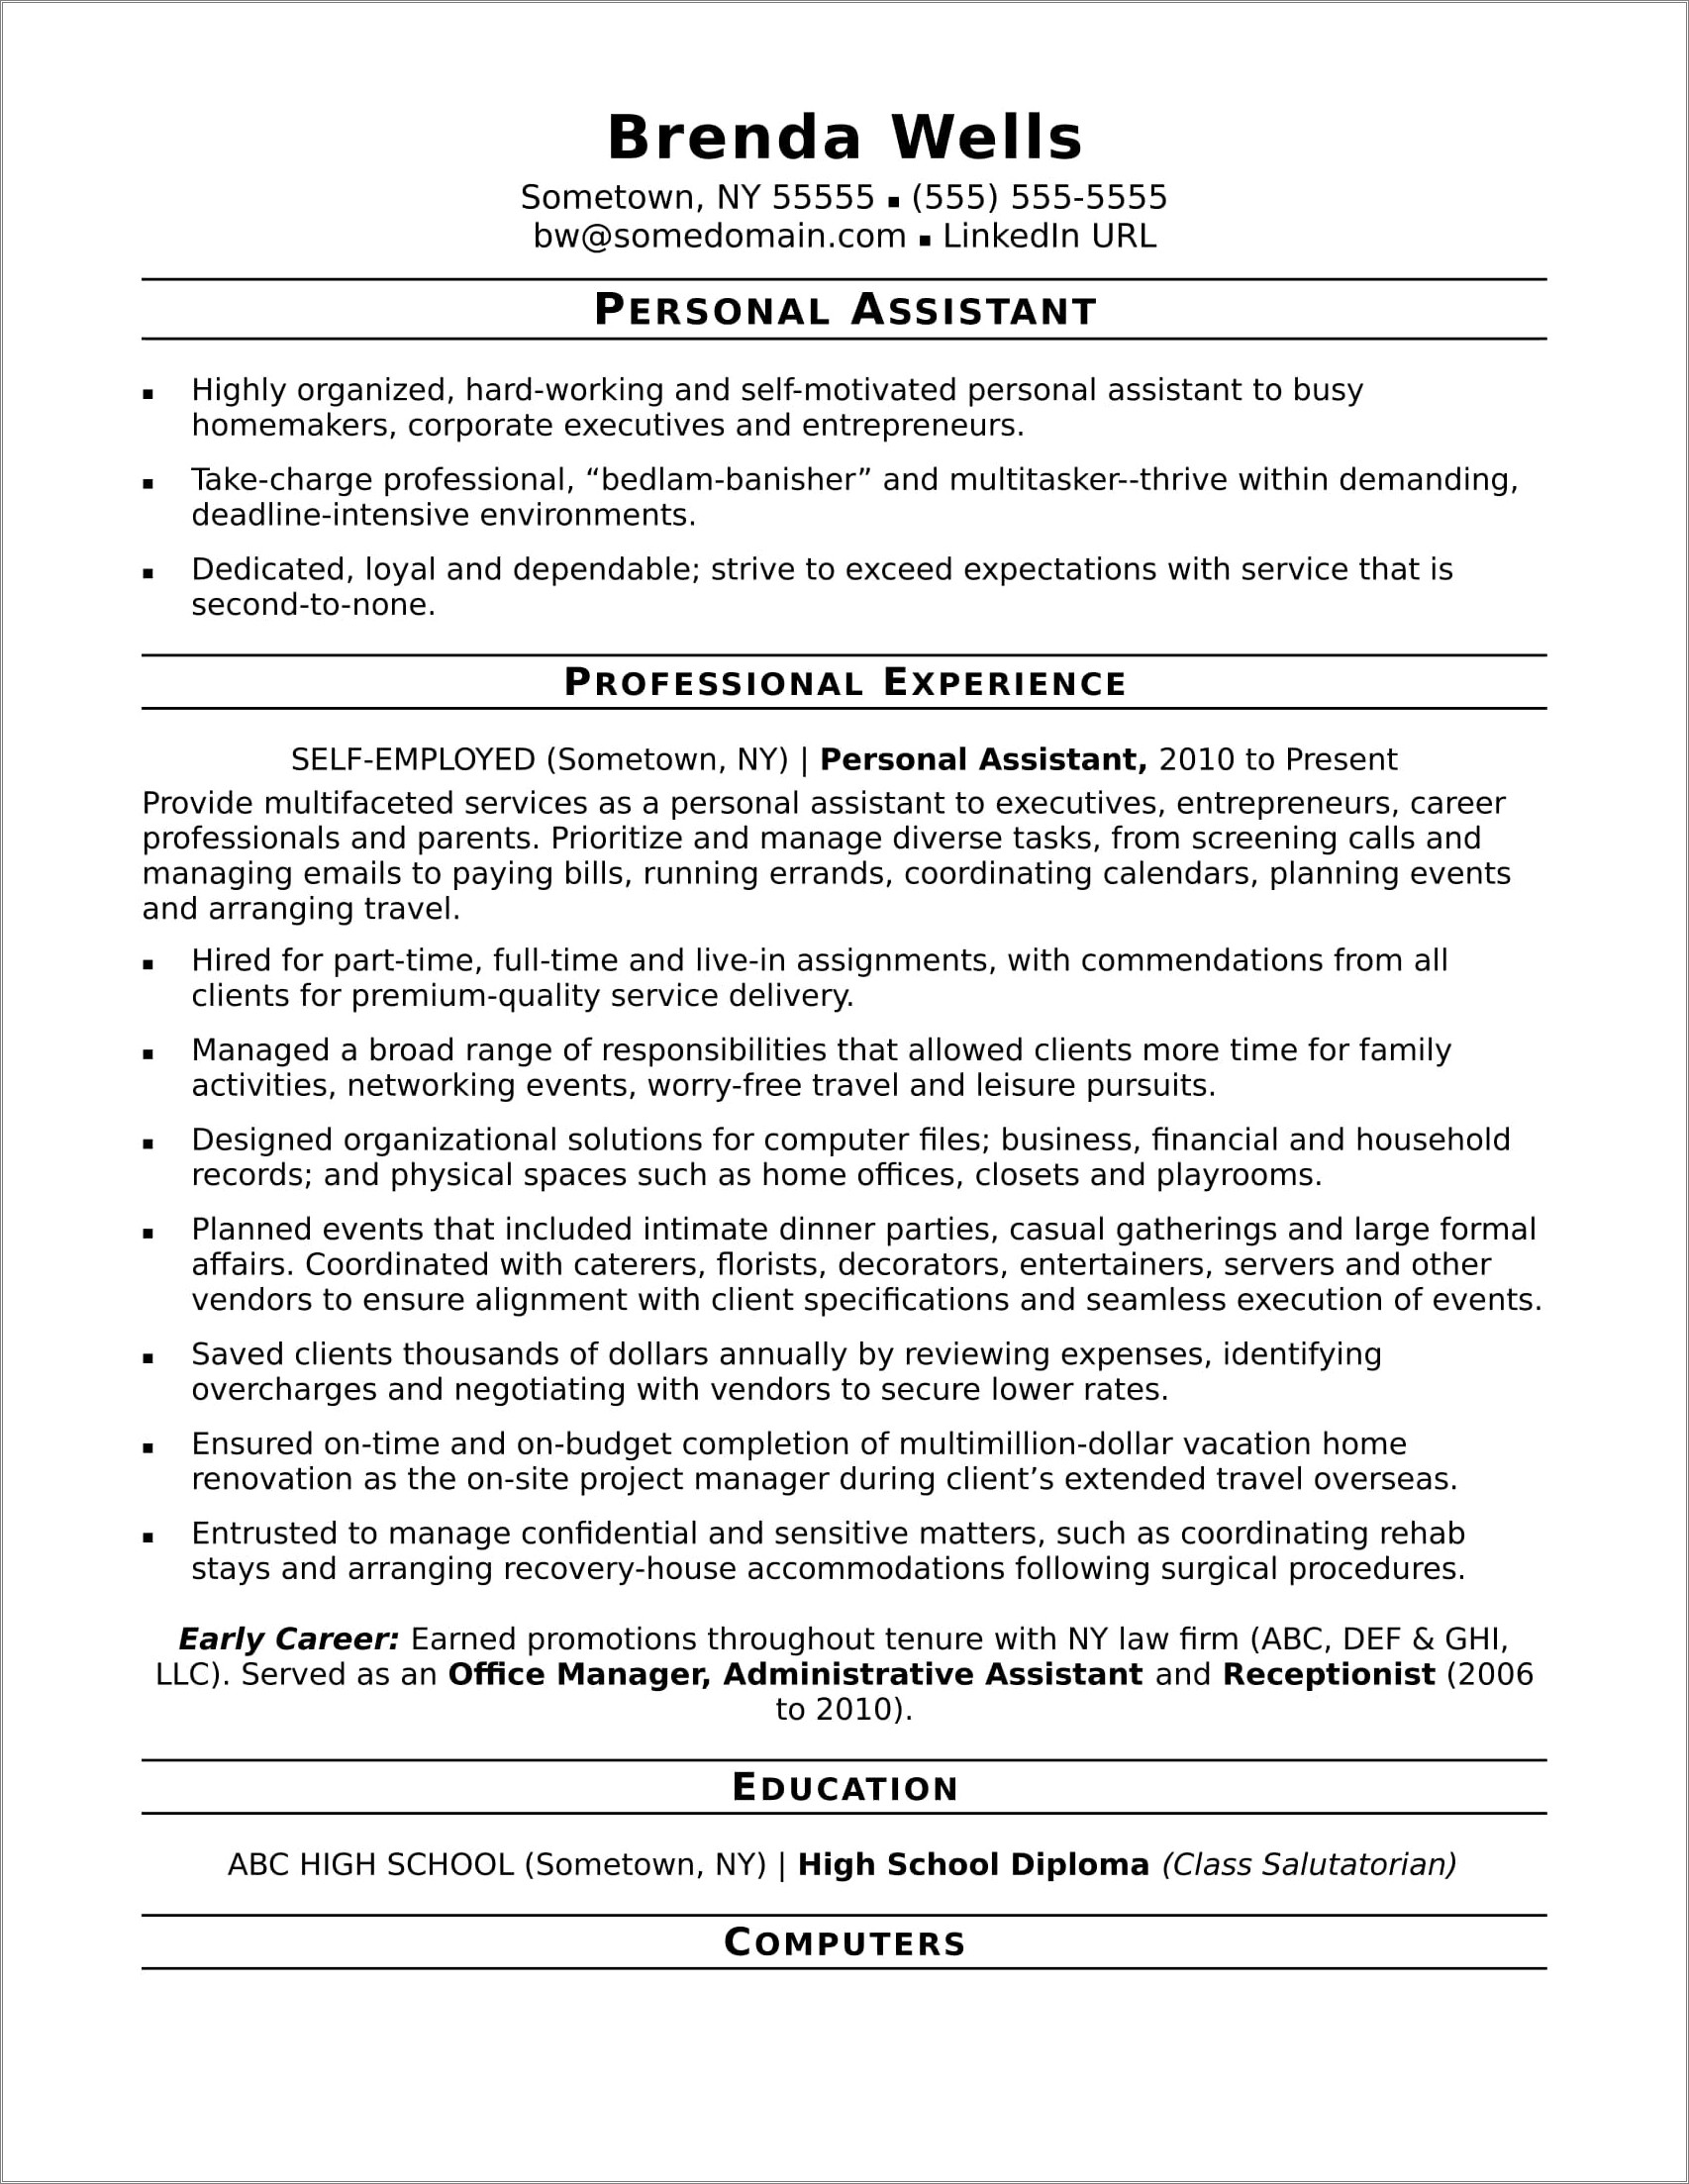 Best Font To Use For Executive Assistant Resume